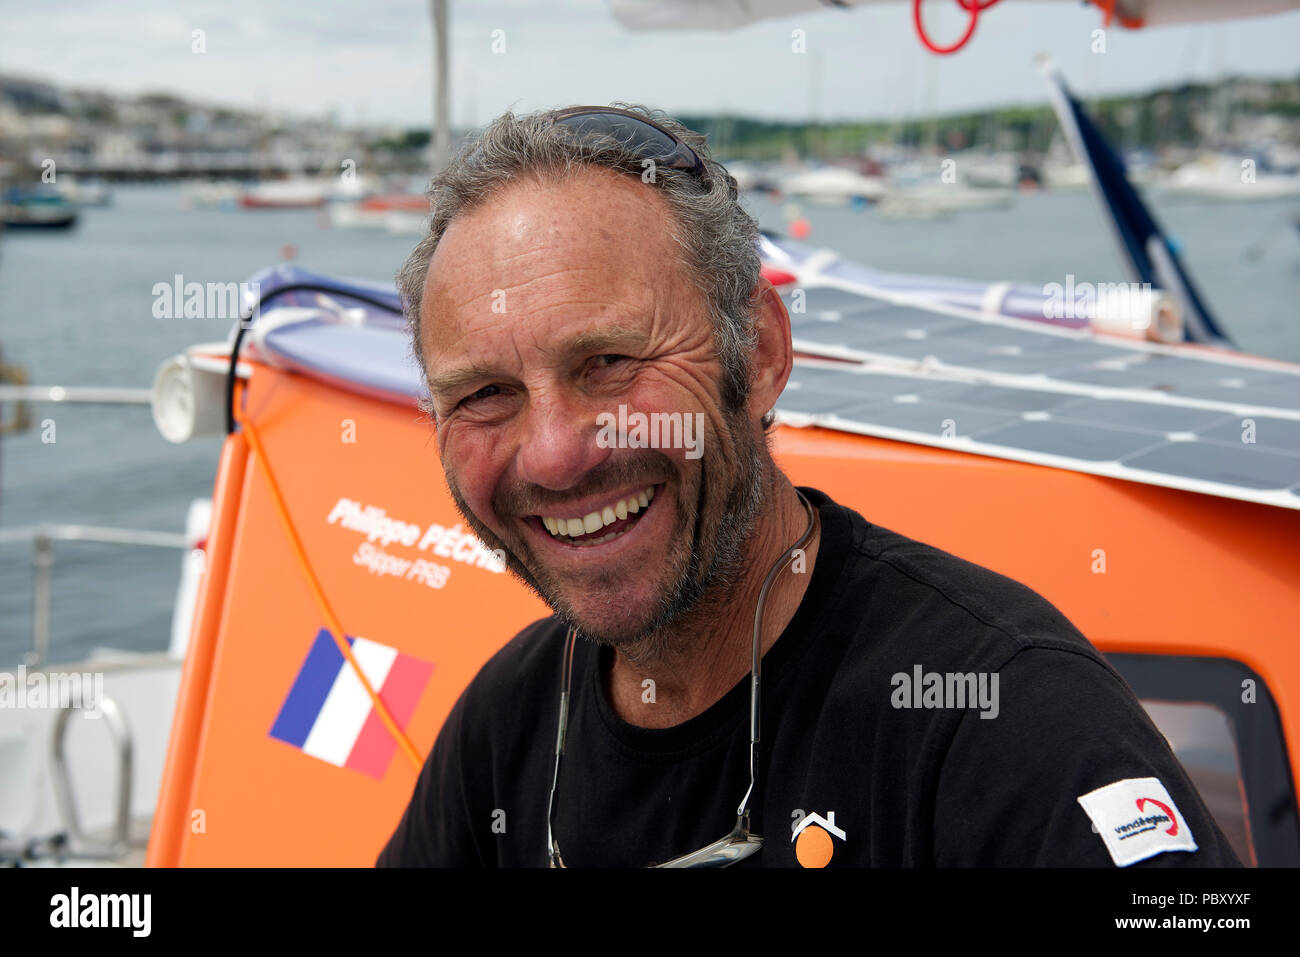 Philippe Péché, skipper of the yacht PRB in the 2018 Golden Globe singlehanded round-the-world race. Photo taken in Falmouth, UK, in June 2018. Stock Photo